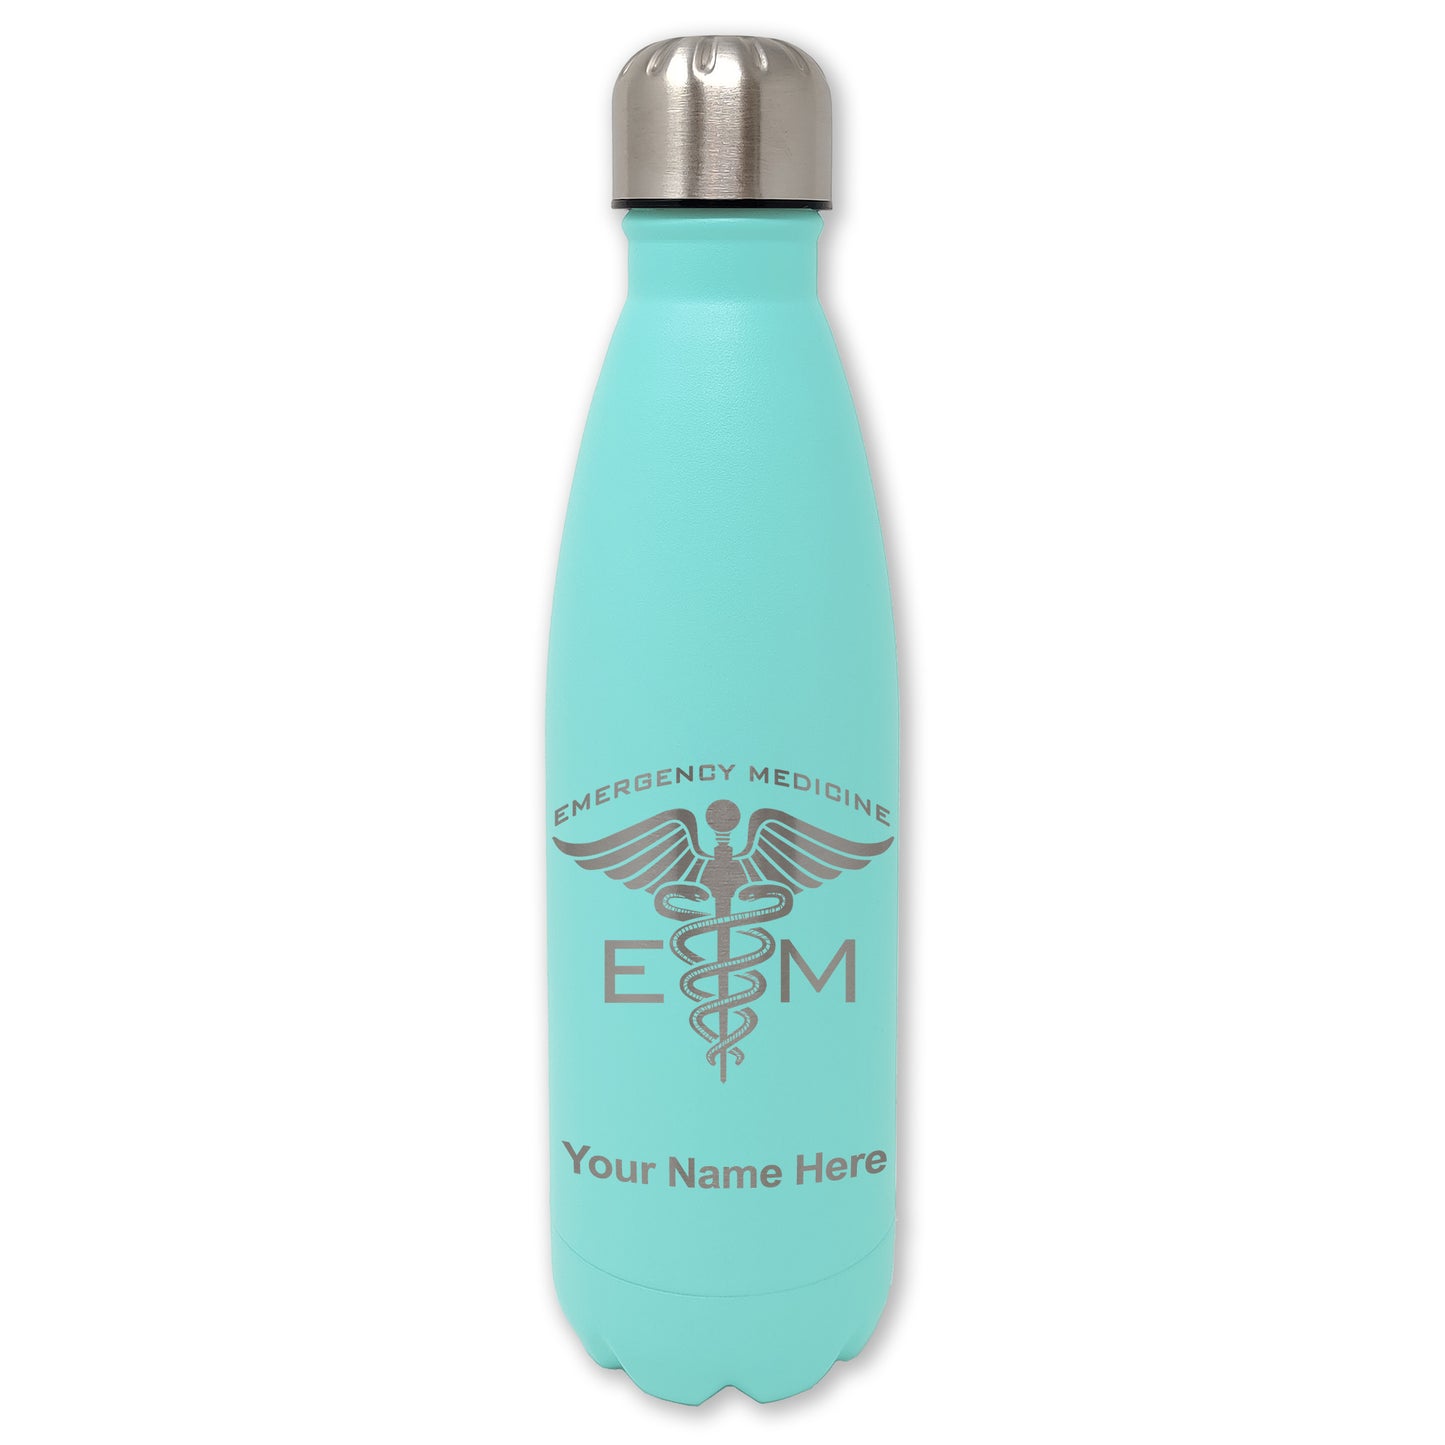 LaserGram Double Wall Water Bottle, Emergency Medicine, Personalized Engraving Included